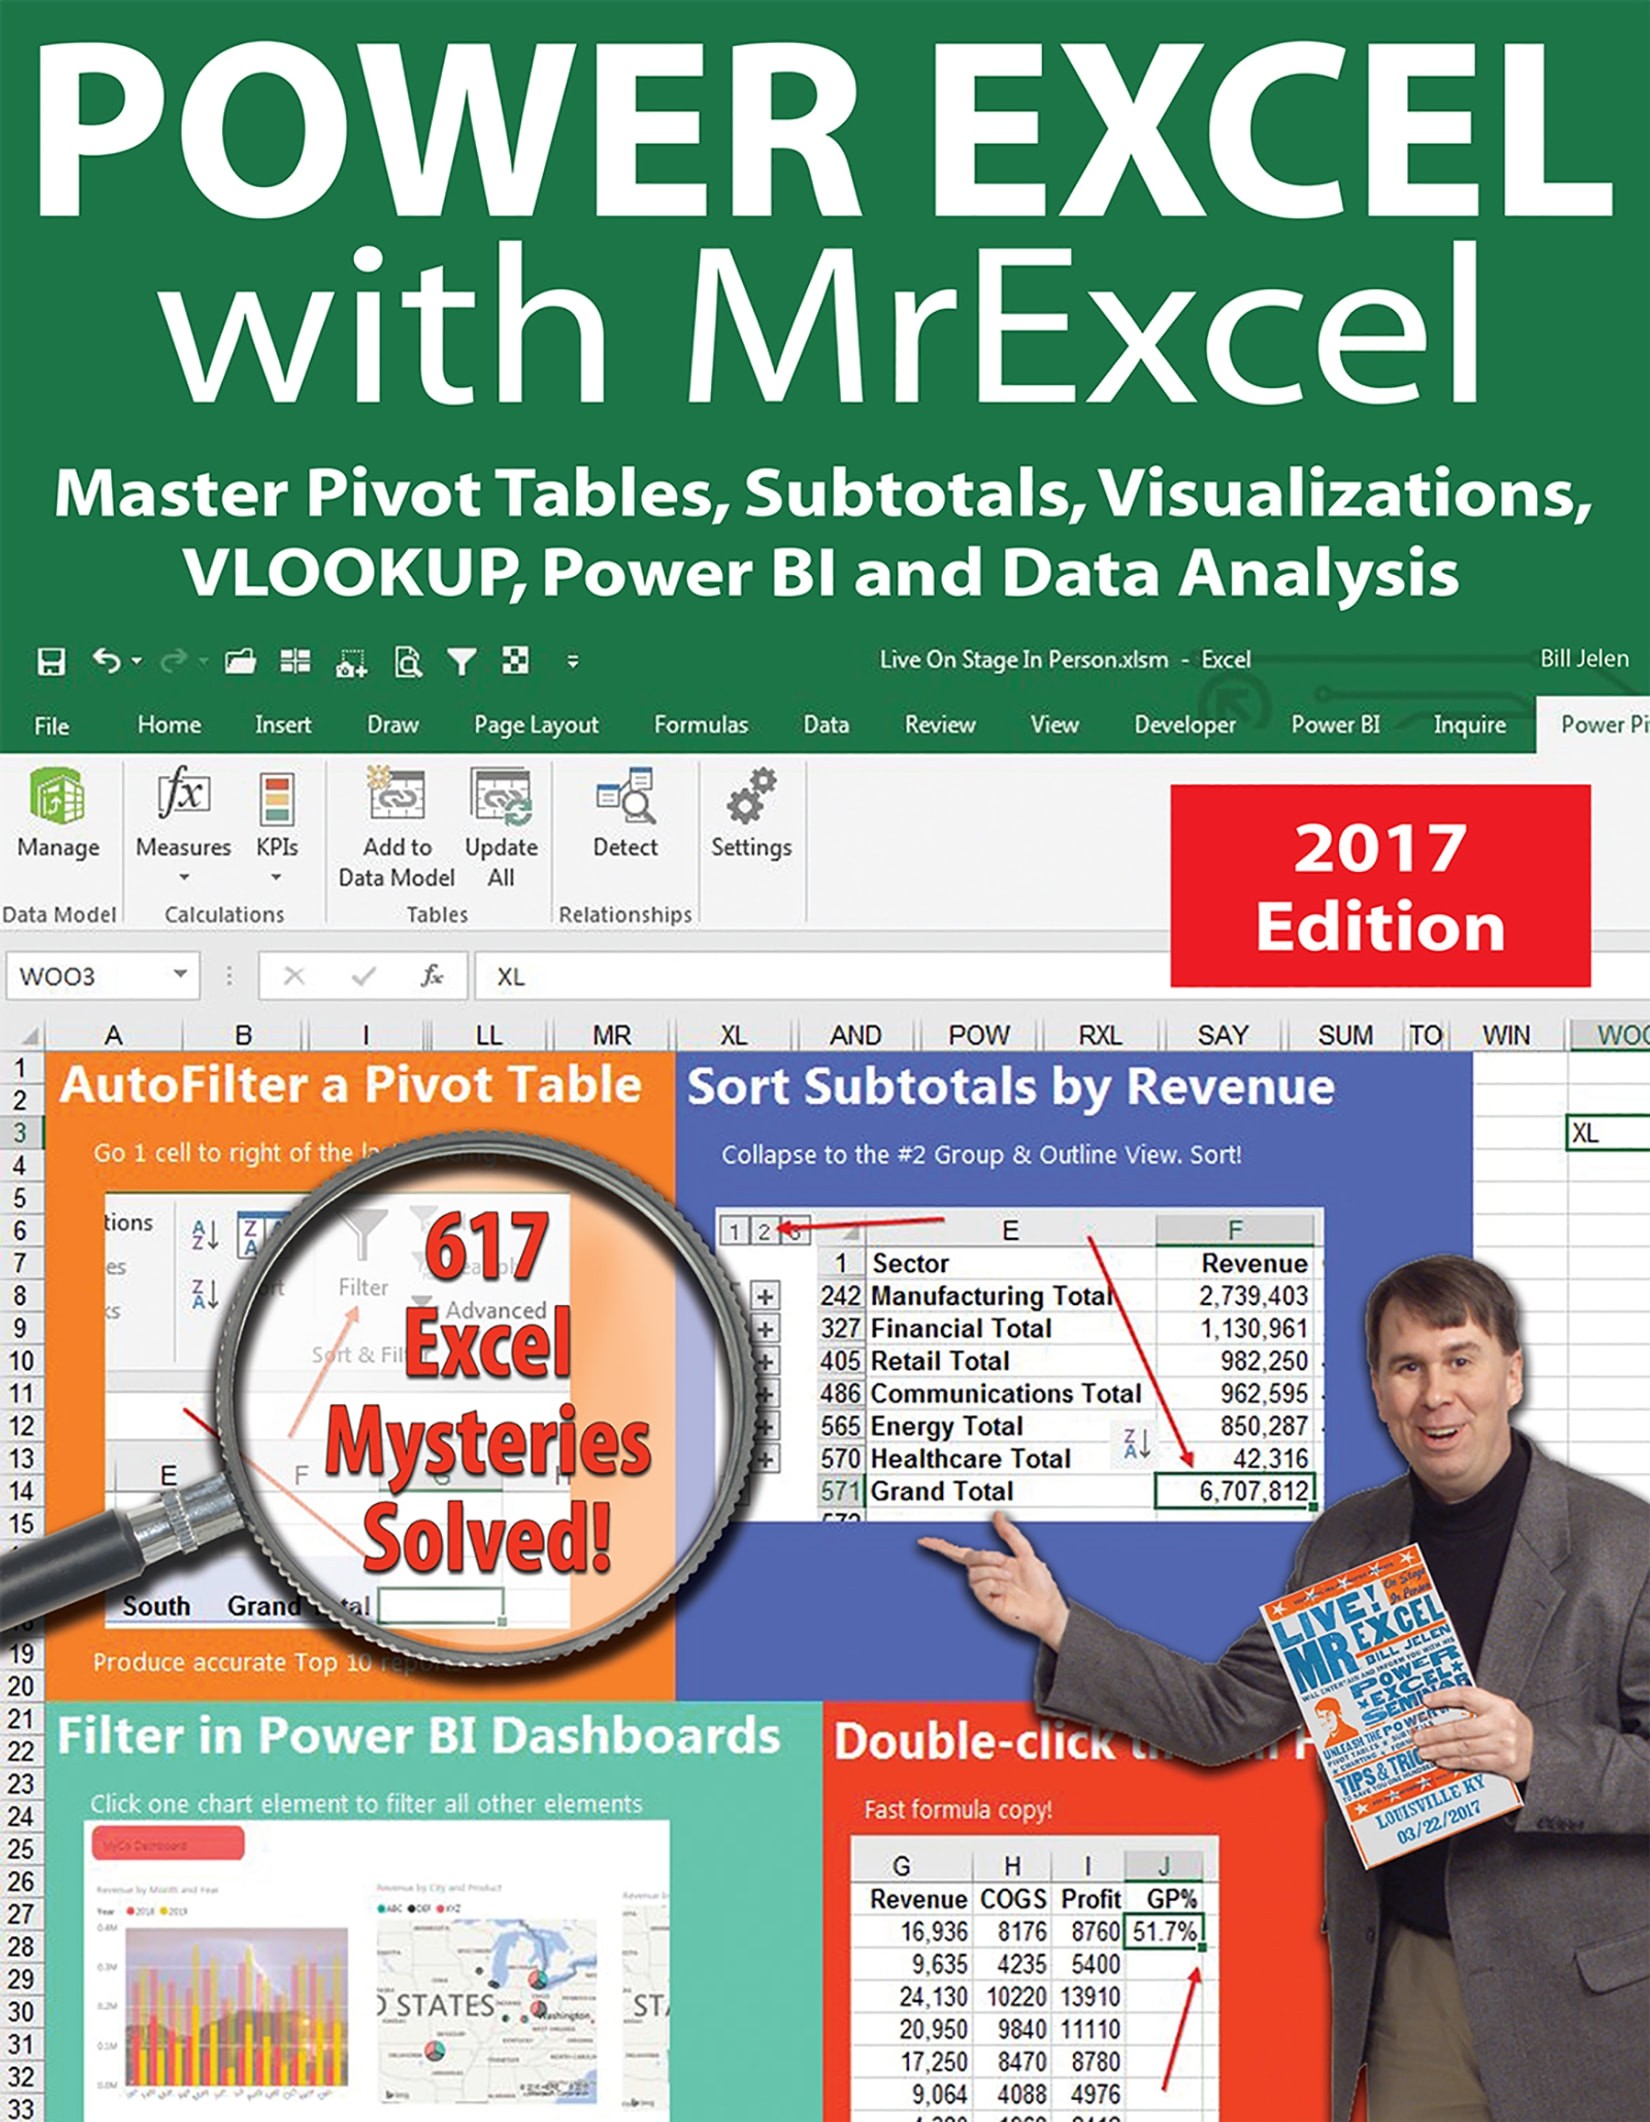 Power Excel with MrExcel - 2017 Edition